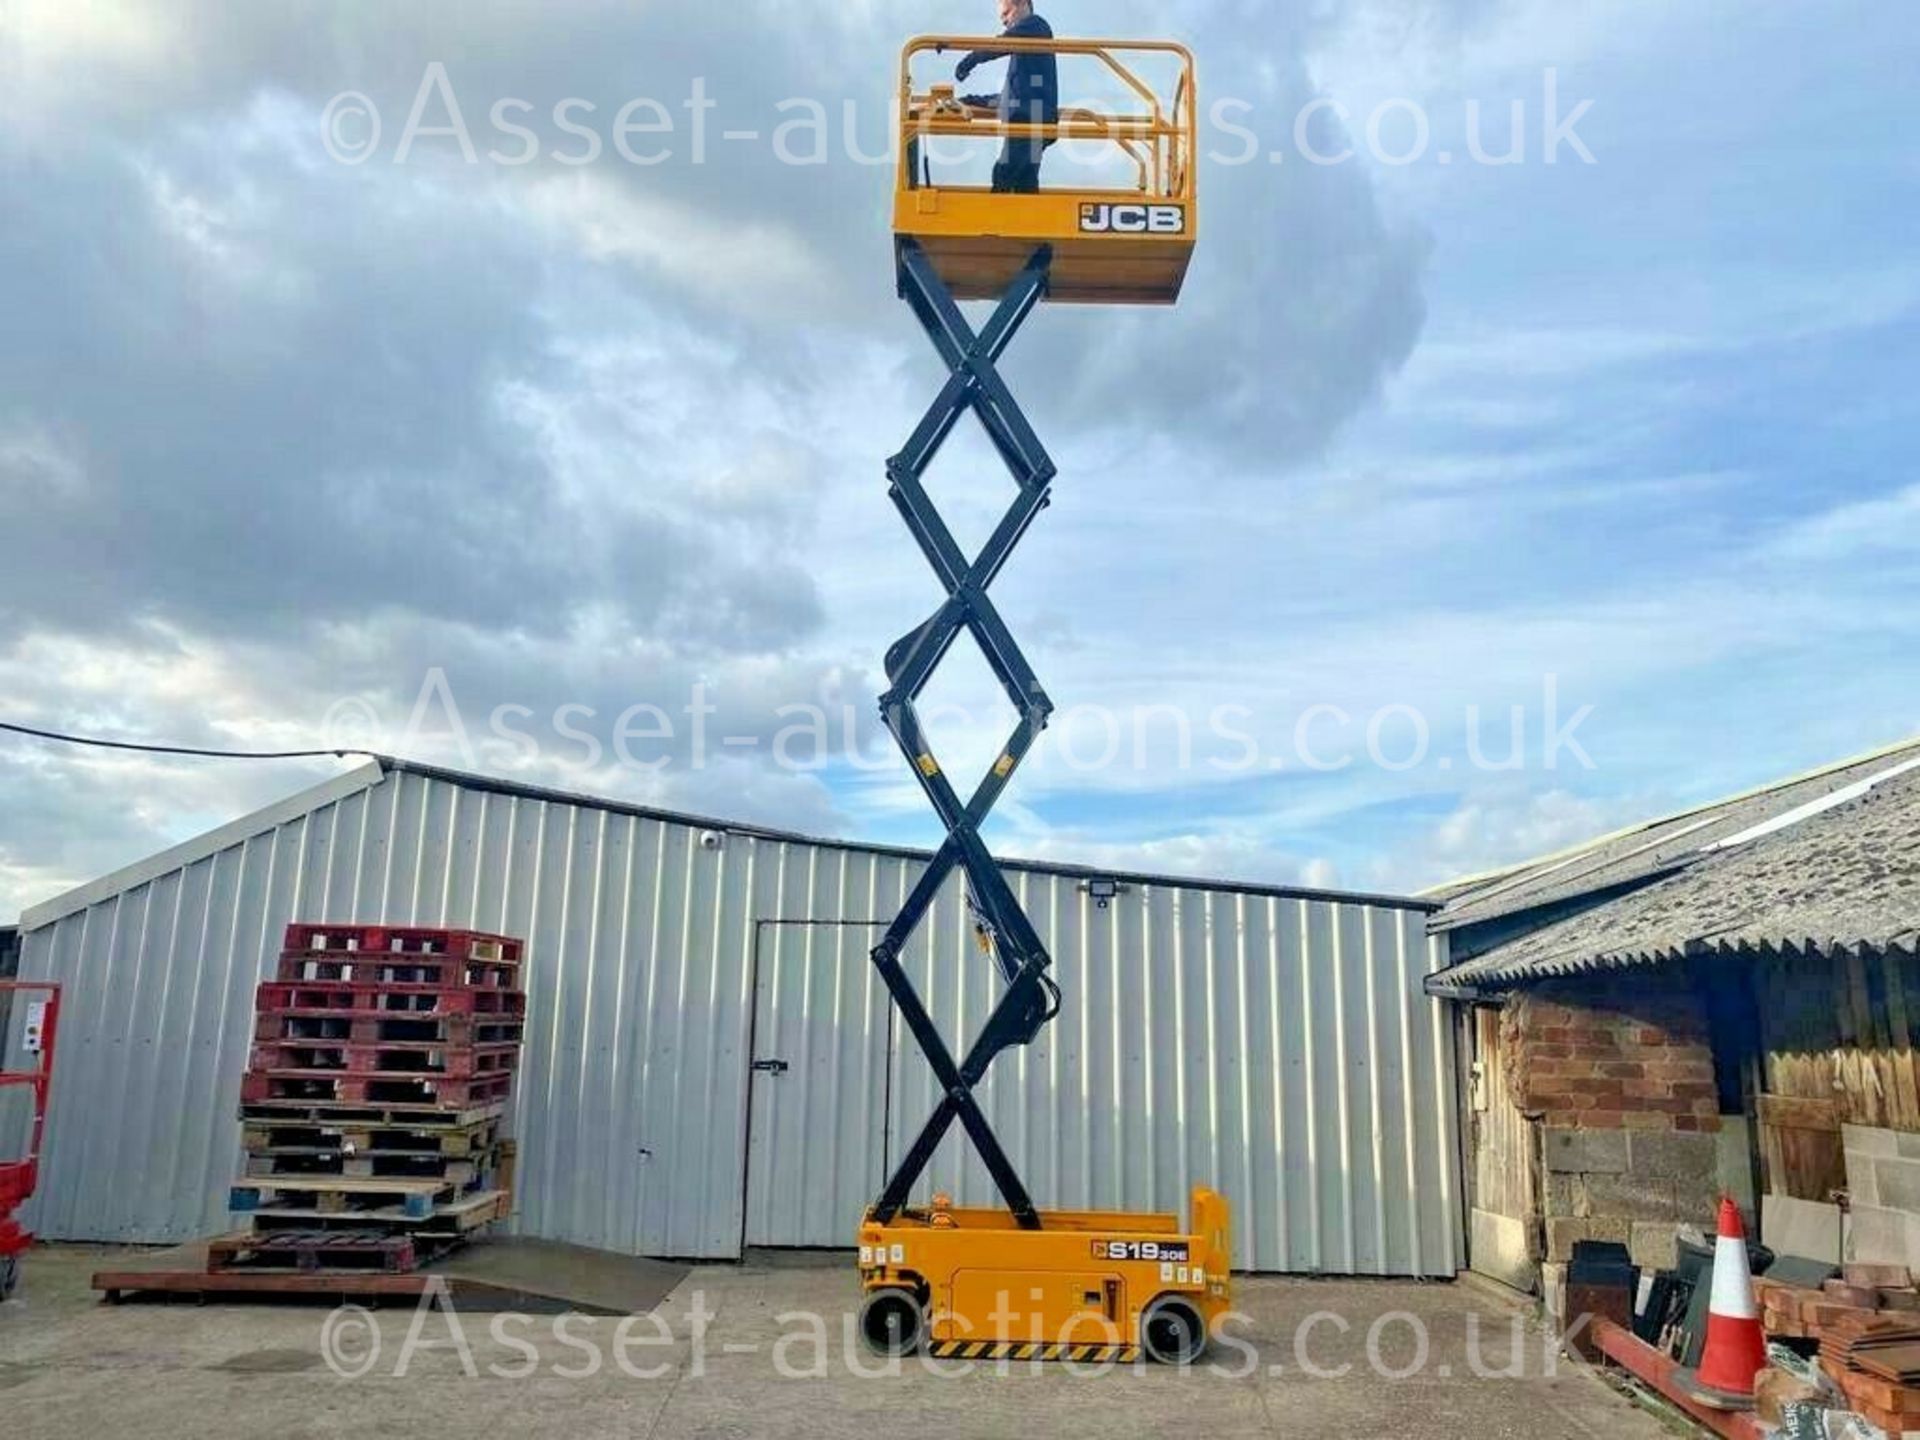 SCISSOR LIFT JCB S1930E ELECTRIC, PLATFORM HEIGHT 5.8m/ 19ft, ONLY 98.4 HOURS, YEAR 2018 *PLUS VAT* - Image 9 of 14